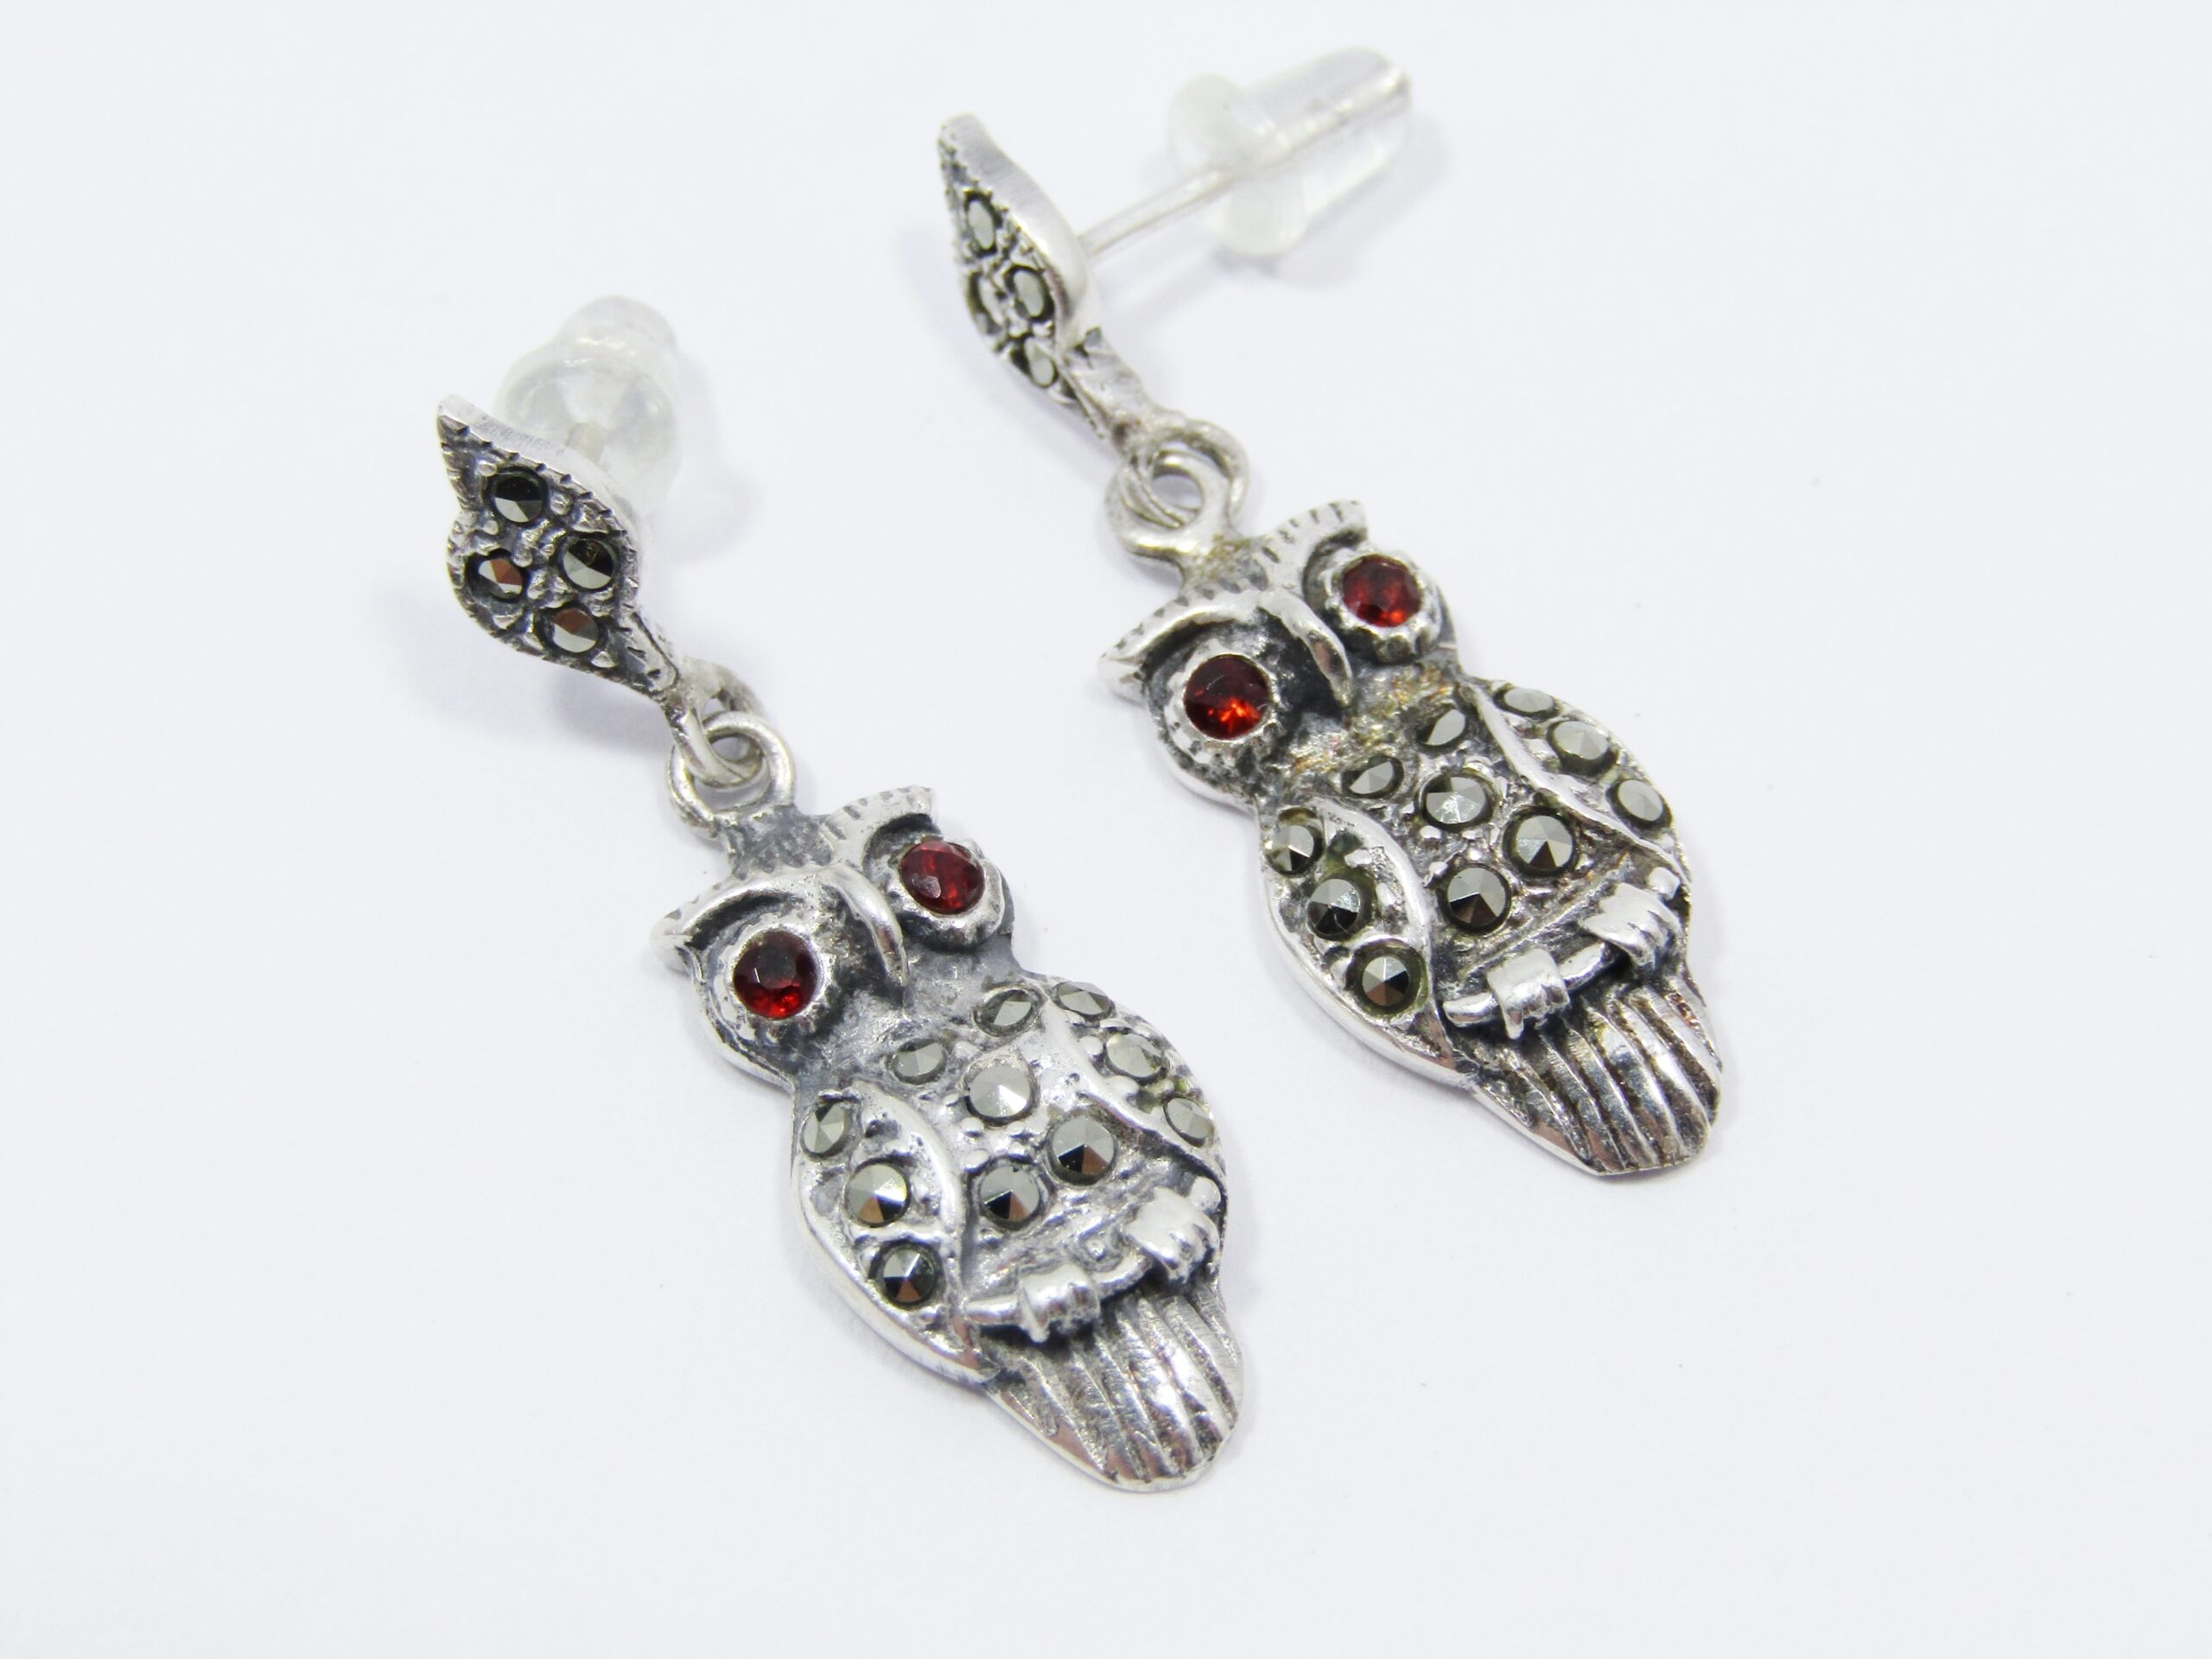 A Lovely Pair of Owl Marcasite Dangling Earrings in Sterling Silver.